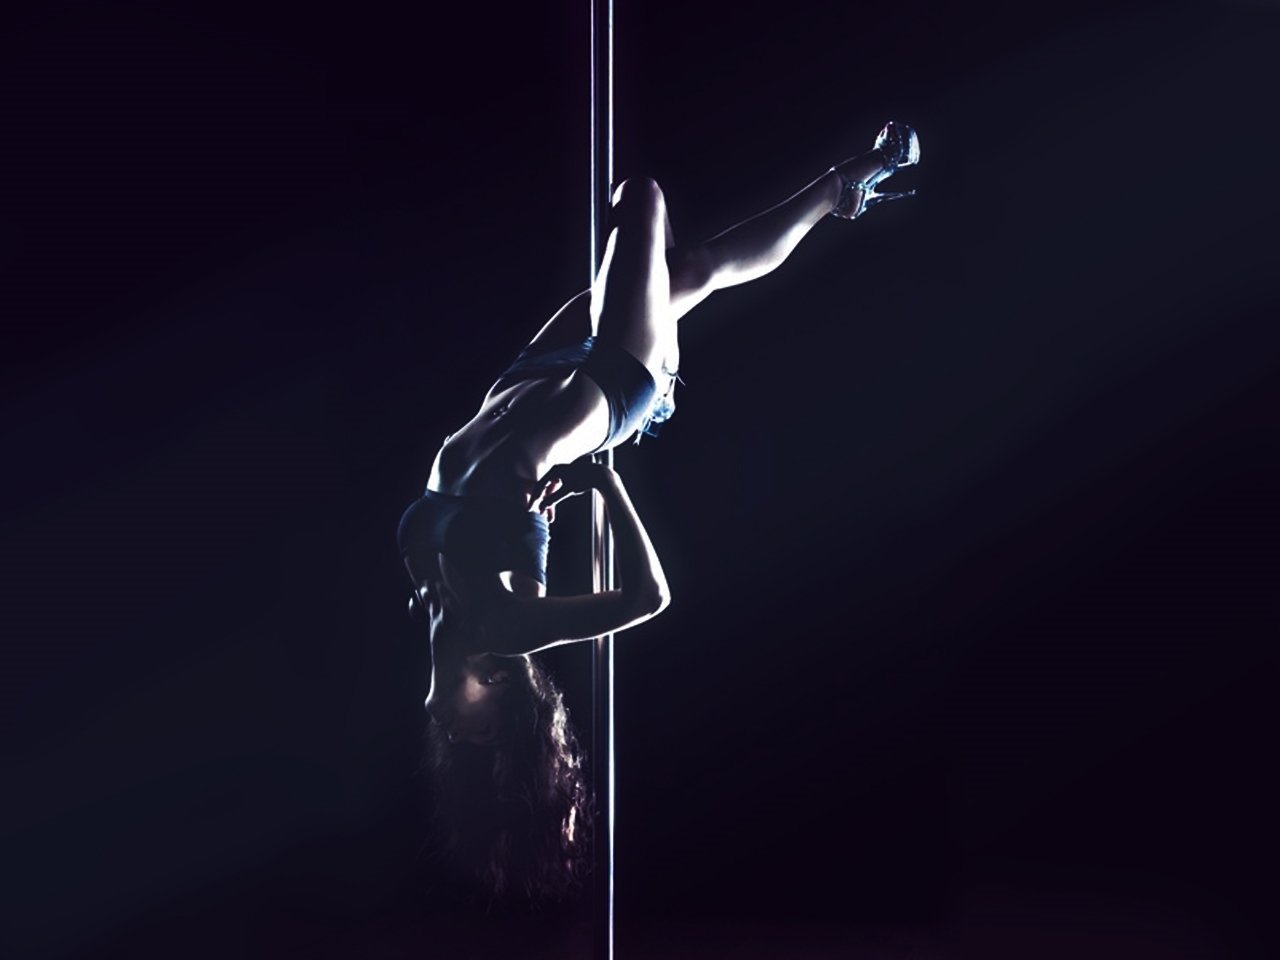 Pole dancer elodie discovers pictures